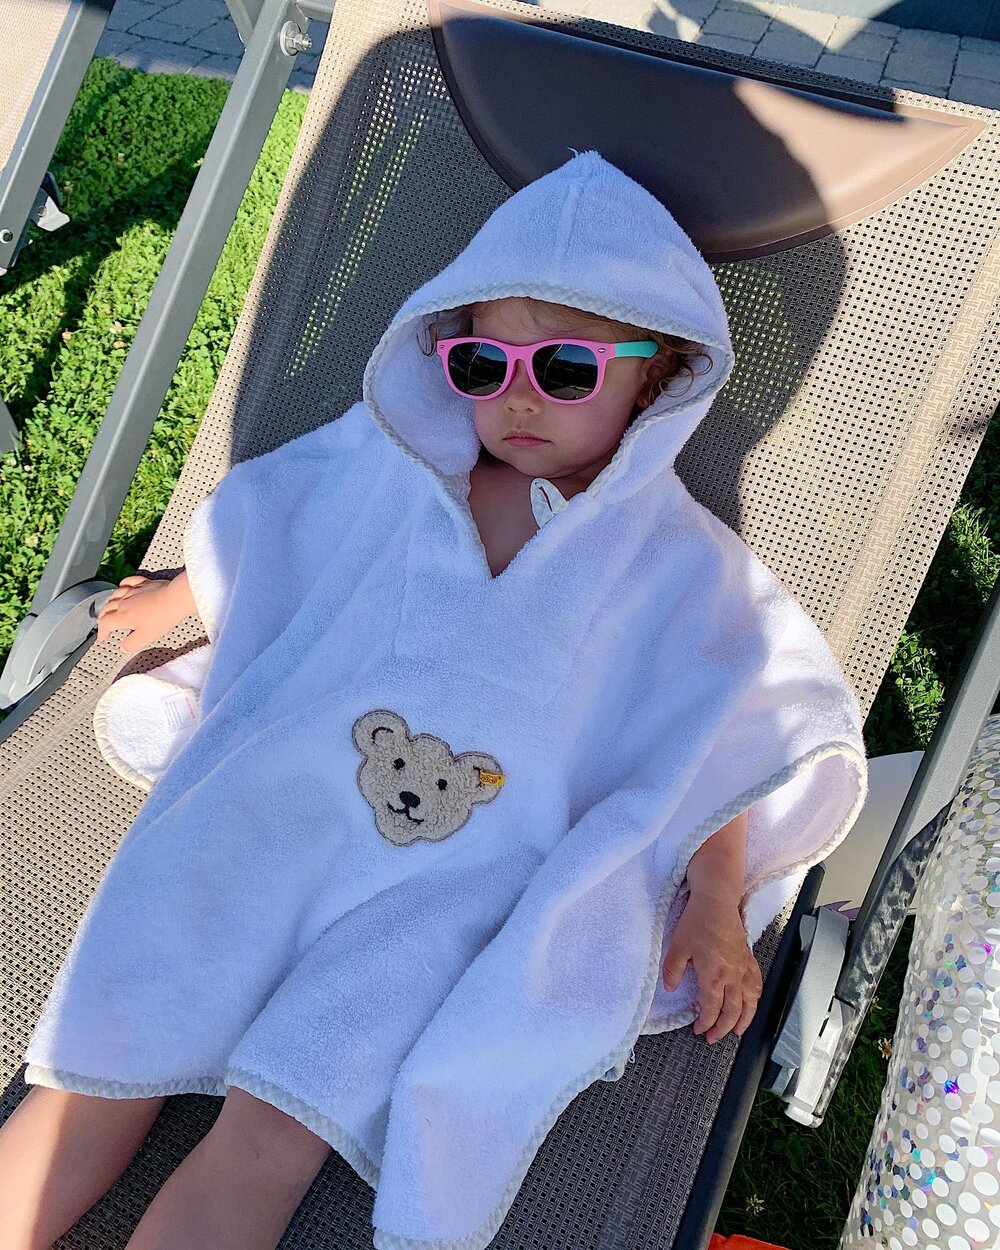 Current mood. 😎

Is it time to go back on vacation yet?

Although road tripping with a two year old was not always perfect, we made some amazing memories together.

I just uploaded two blog posts about our road trip to Provence and tips for taking a